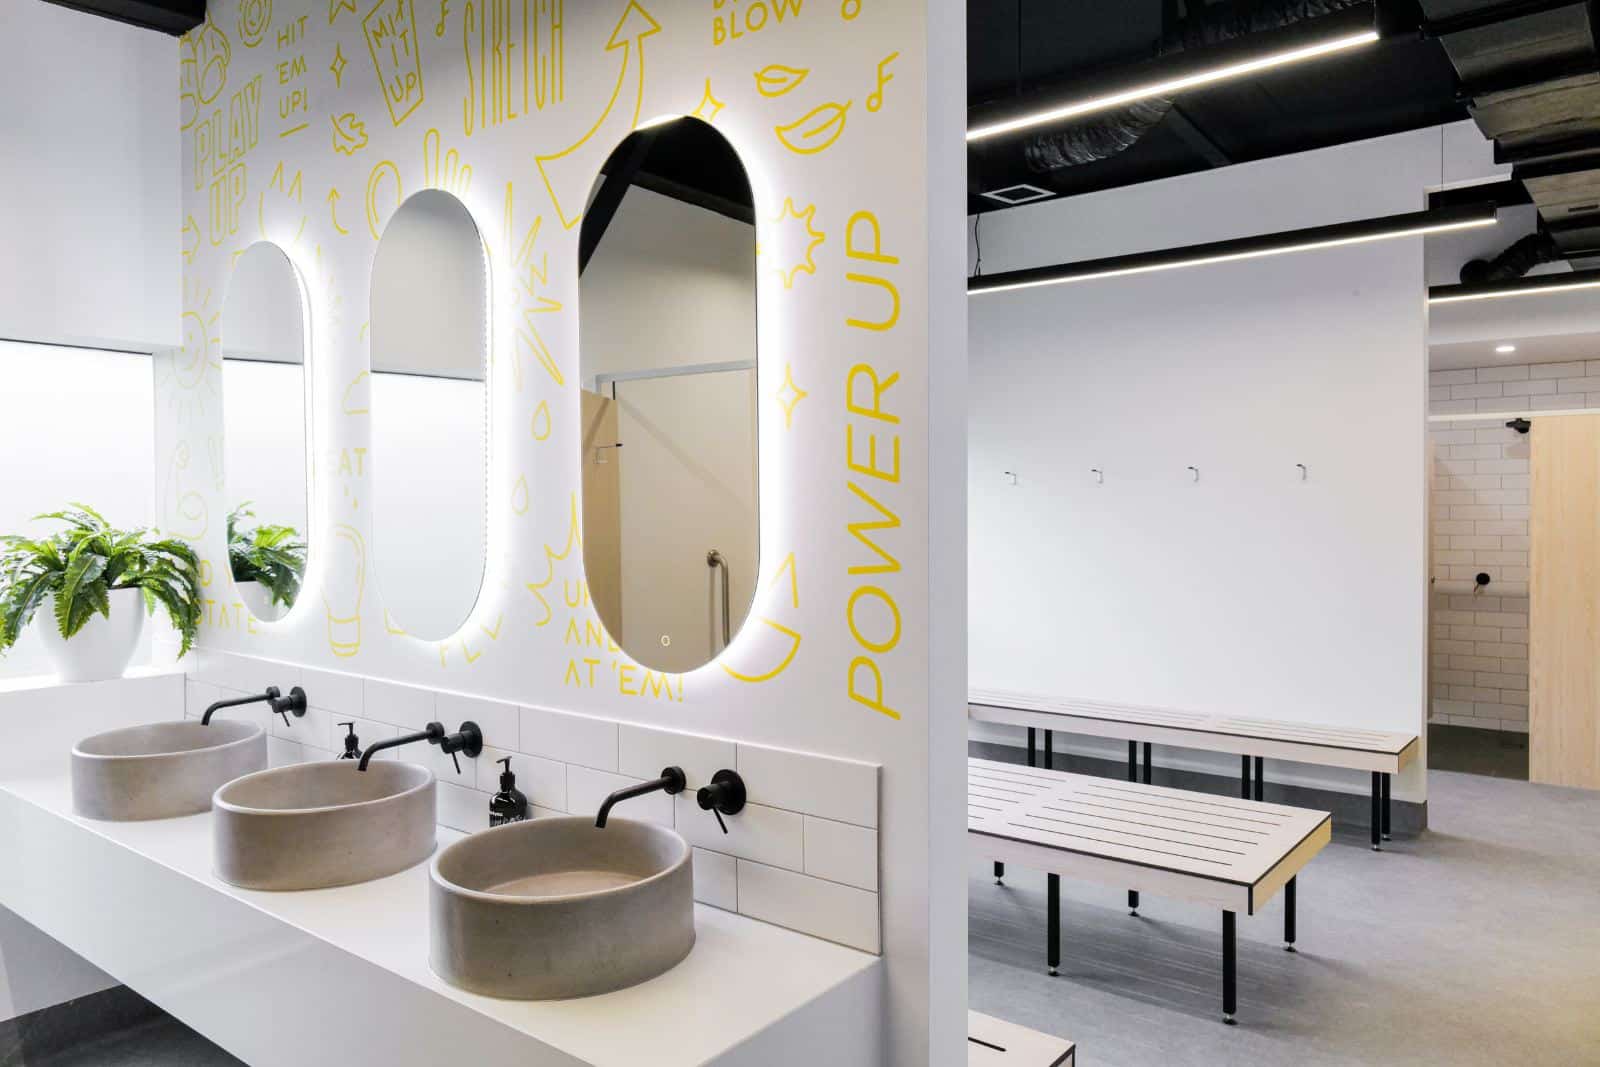 Fresh and clean changerooms at Upstate Studios. Walls are white and covered in yellow uplifting graphics. The mirrors have great lighting and high end hair tools and quality shower products are stocked in the space.